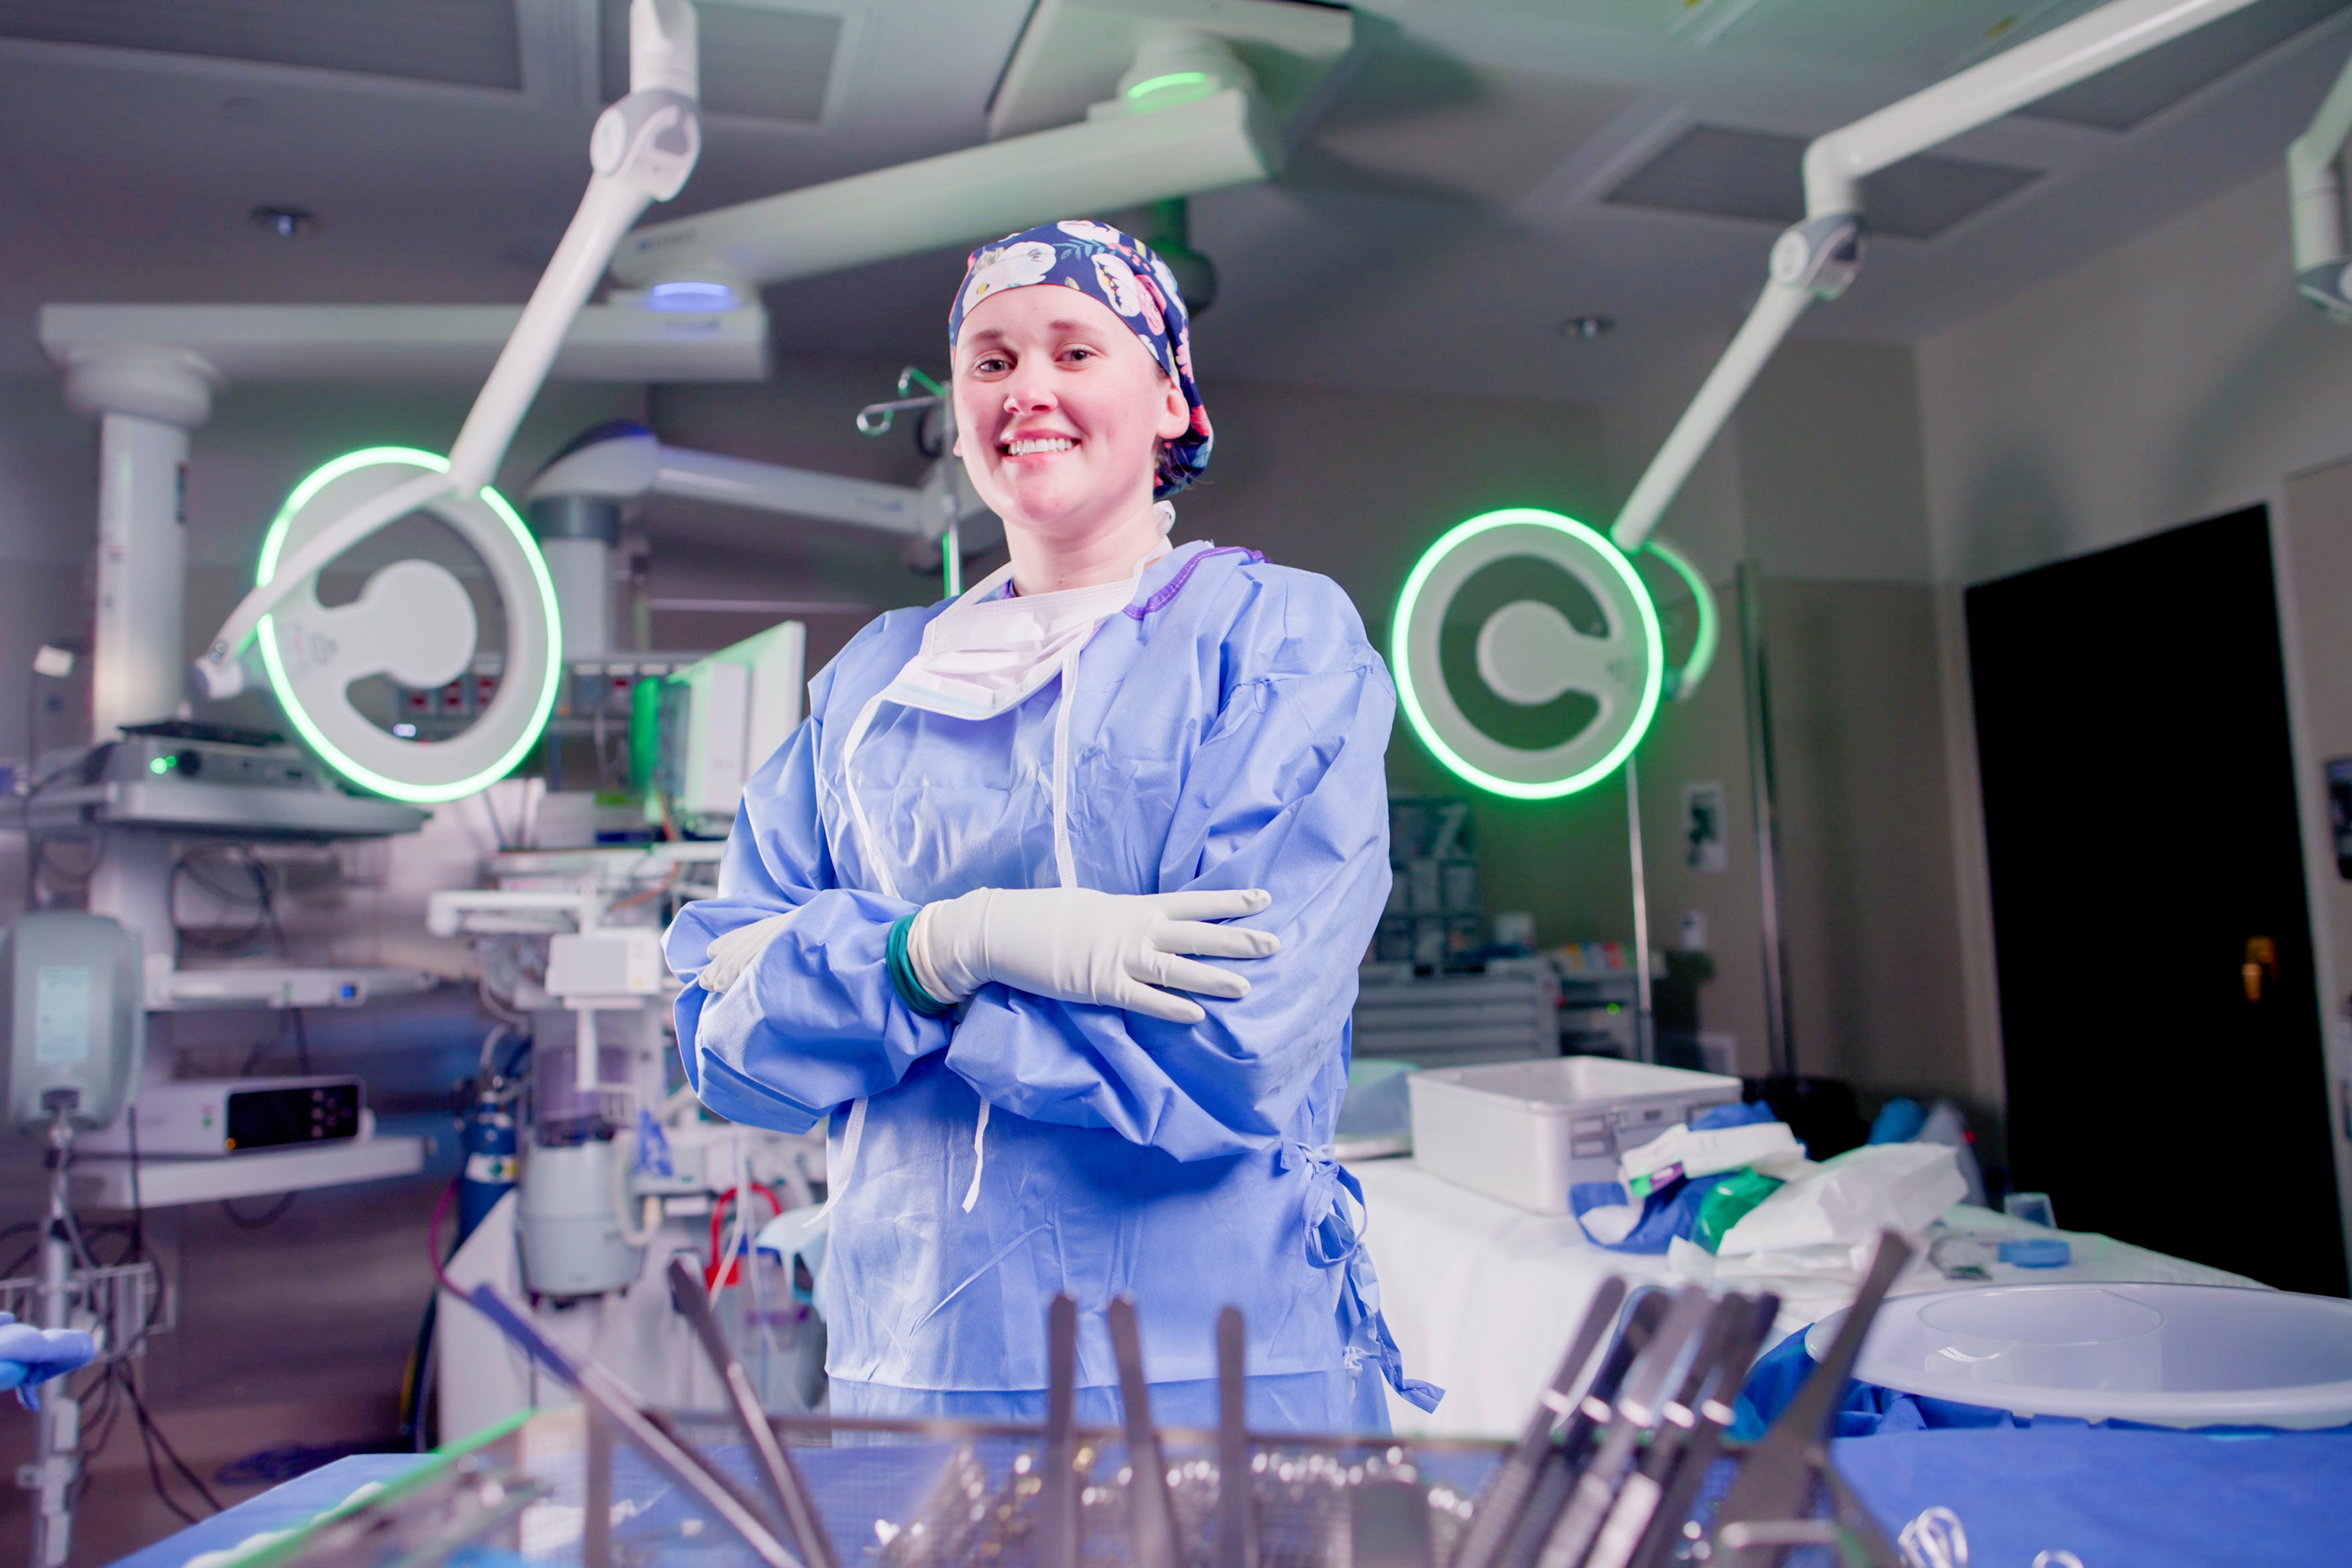 surgical technologist smiling at the camera in an operating room